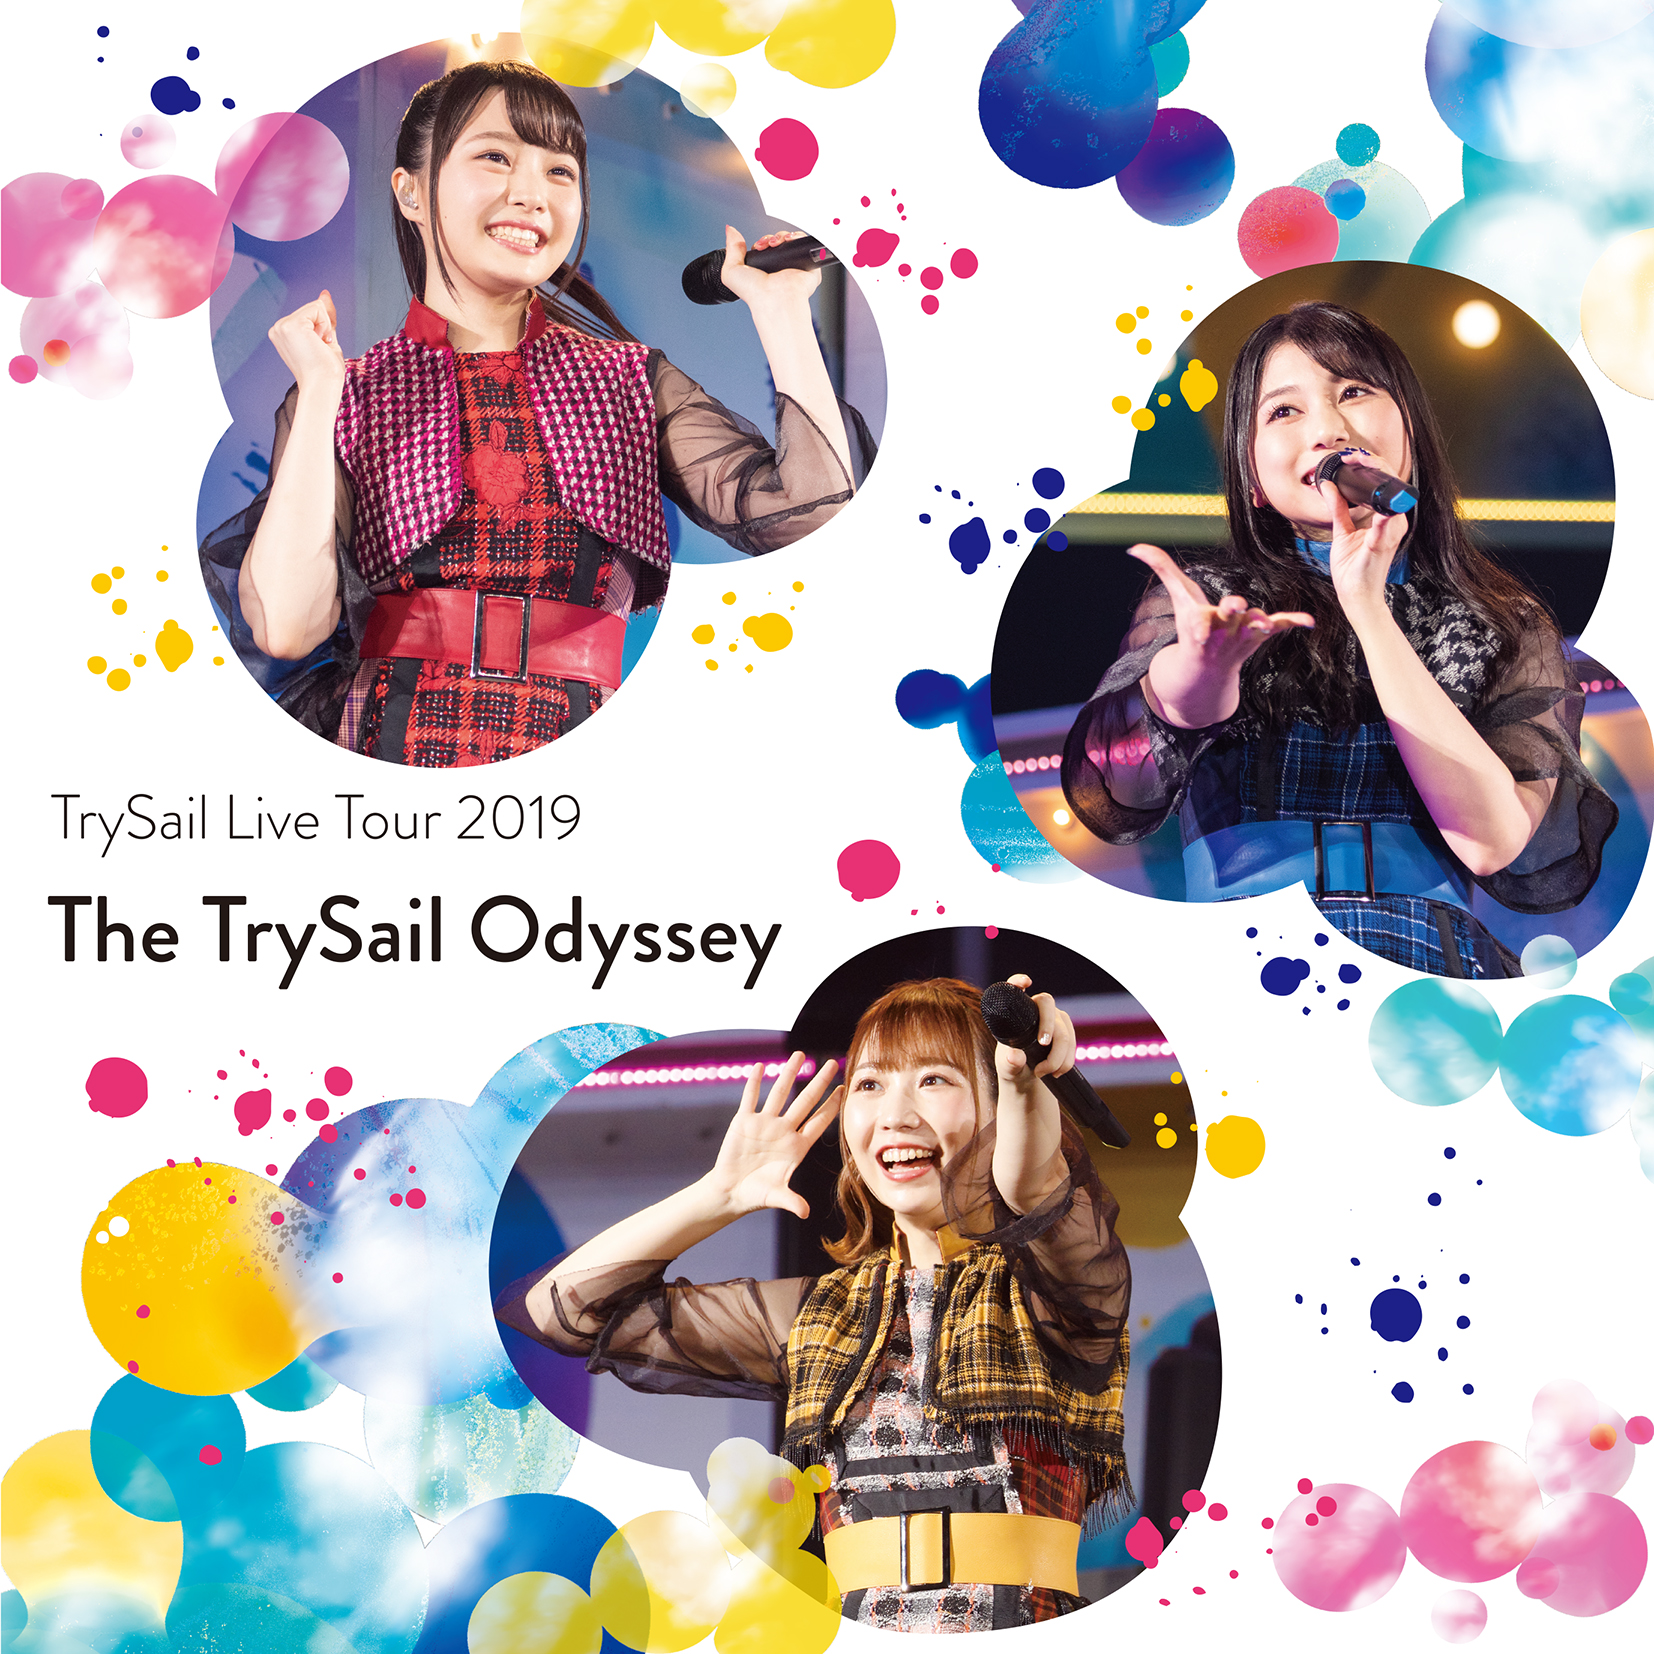 Trysail 自身最大規模のライブツアー Trysail Live Tour 19 The Trysail Odyssey の音源を一斉配信 株式会社ソニー ミュージックレーベルズのプレスリリース